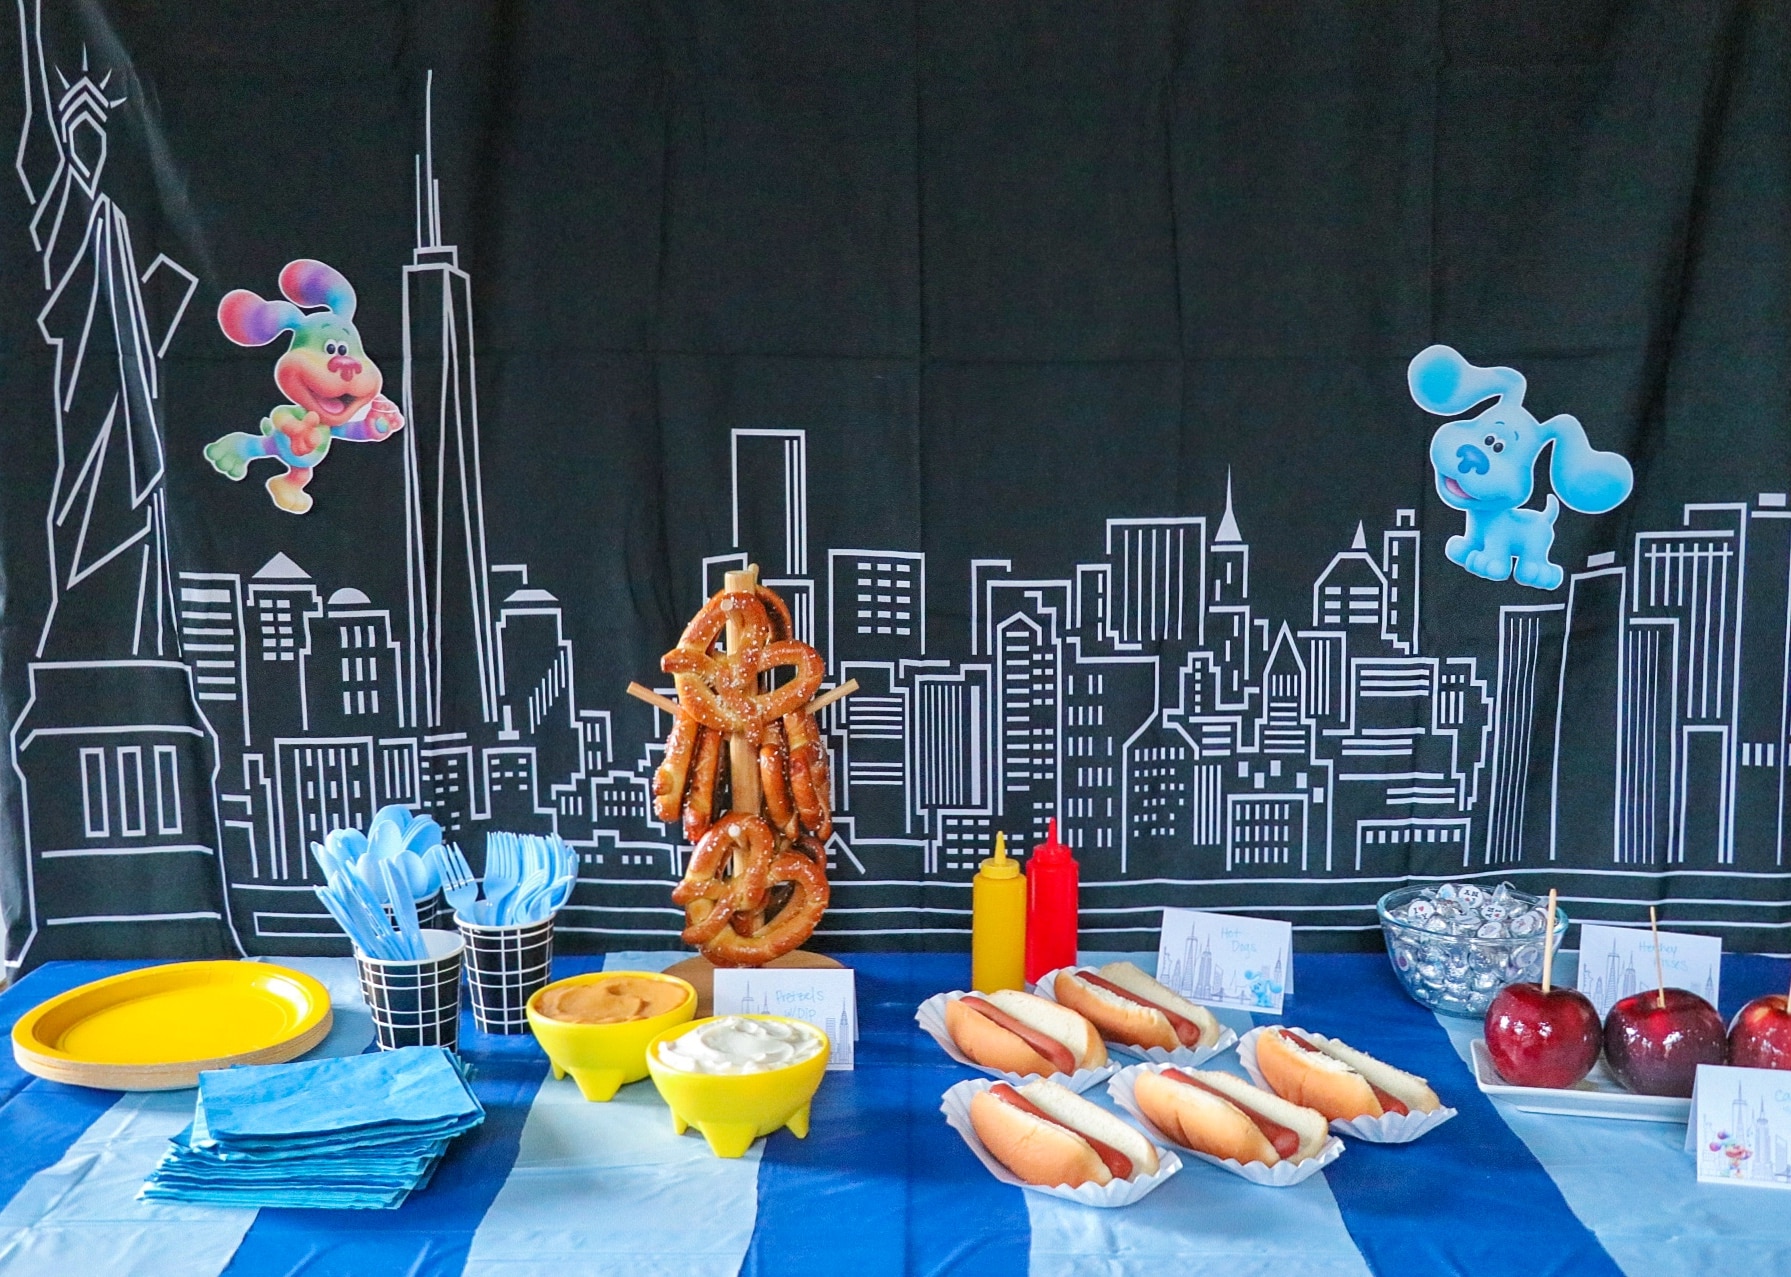 Blue's Big City Adventure Watch Party (fun New York themed party!)